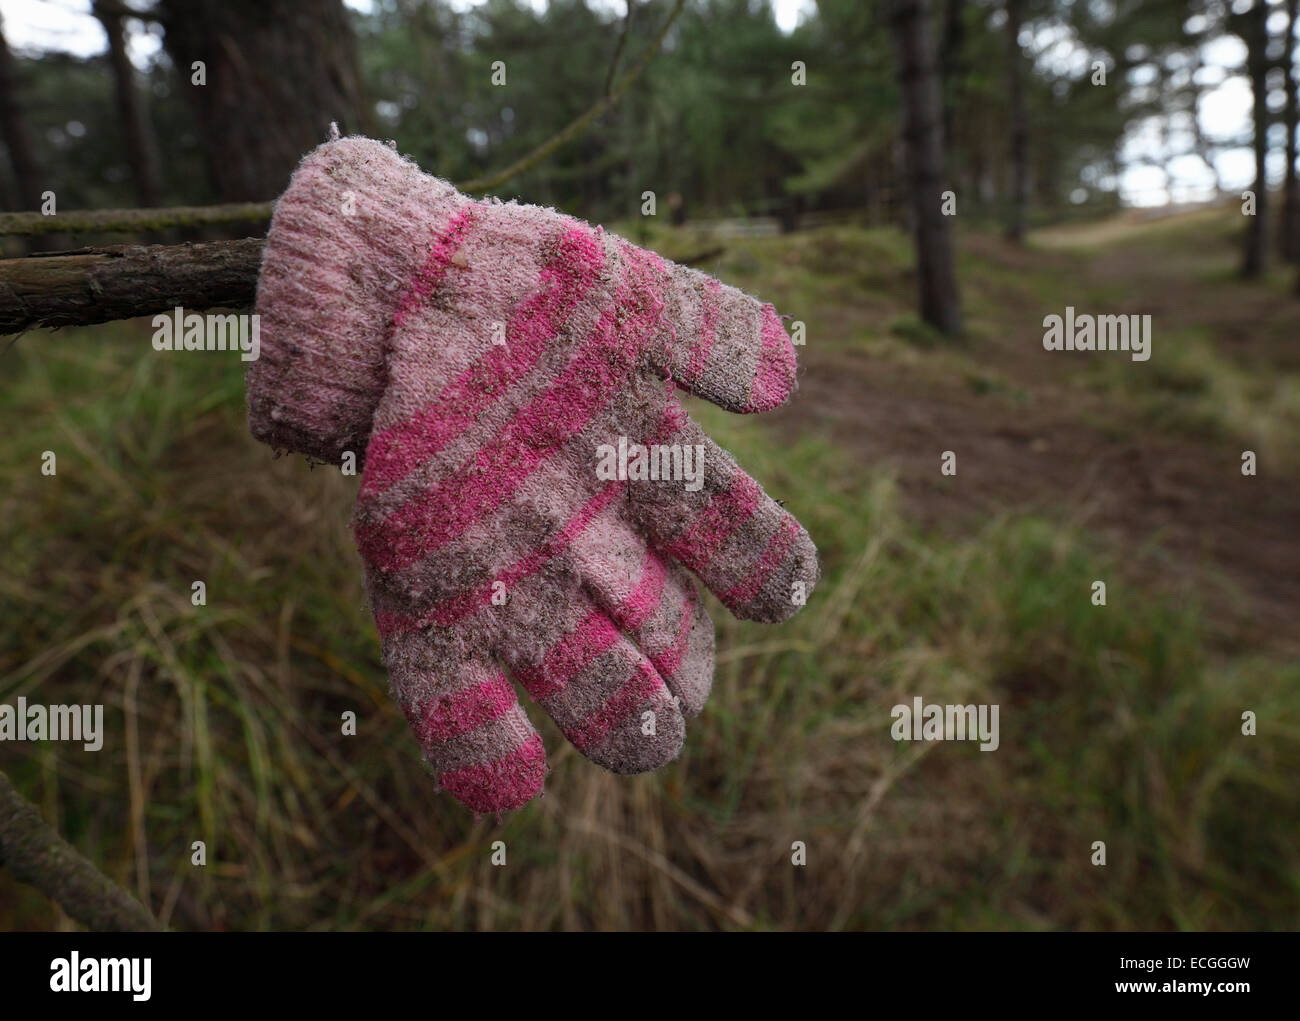 A forgotten child's glove hung on a branch to help someone find it. Stock Photo